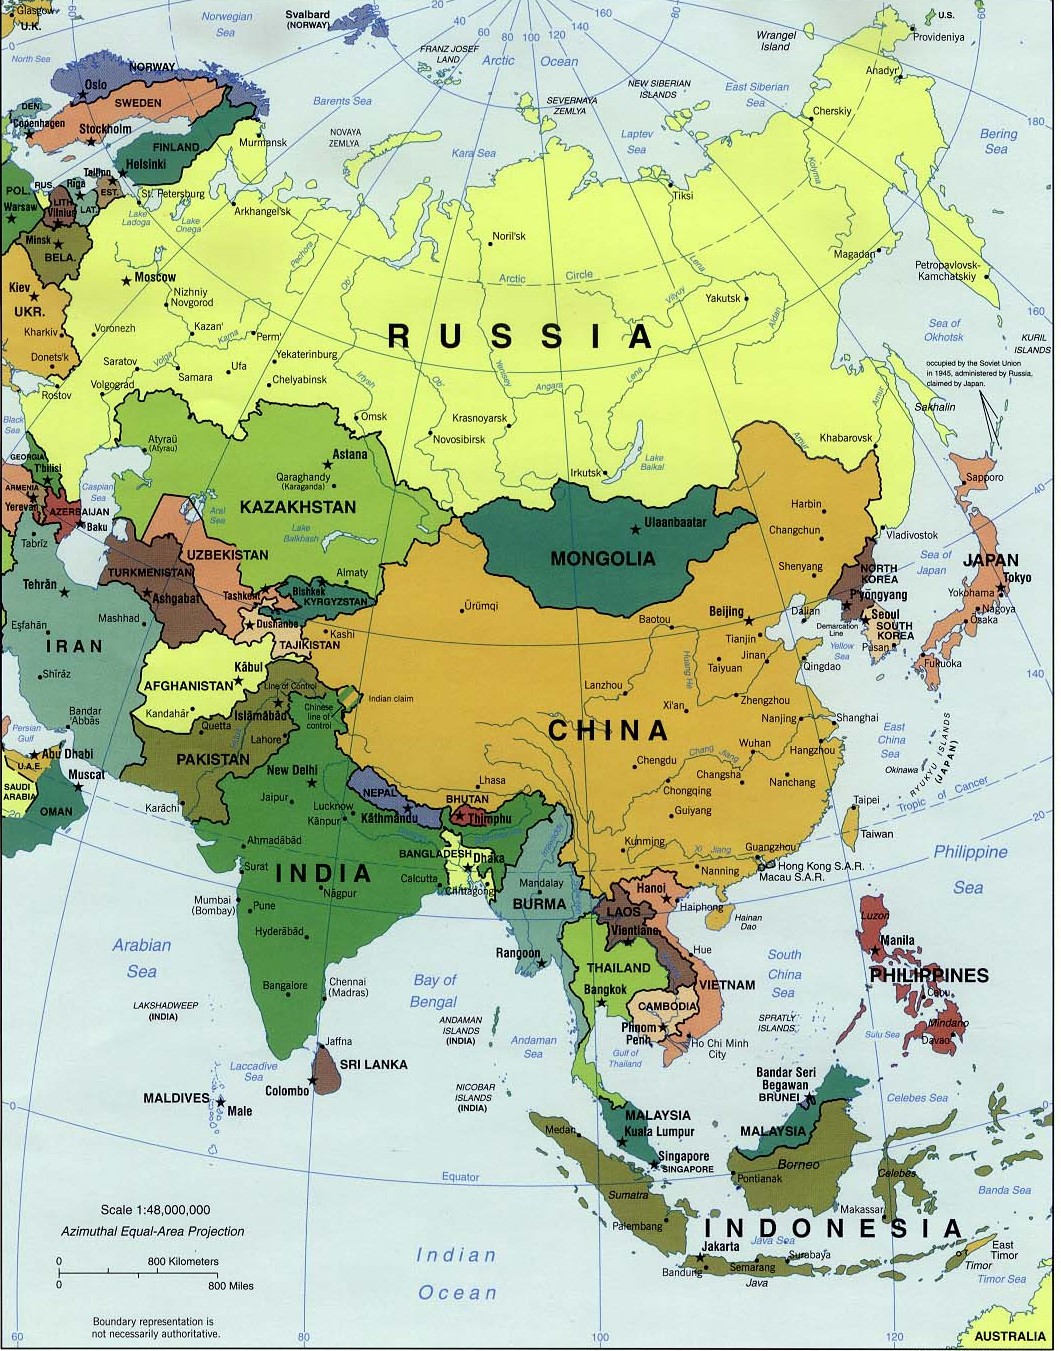 Towards a New World Order in Eurasia: The 21st Century’s Great Game, Towards a New World Order in Eurasia: The 21st Century’s Great Game, Middle East Politics &amp; Culture Journal